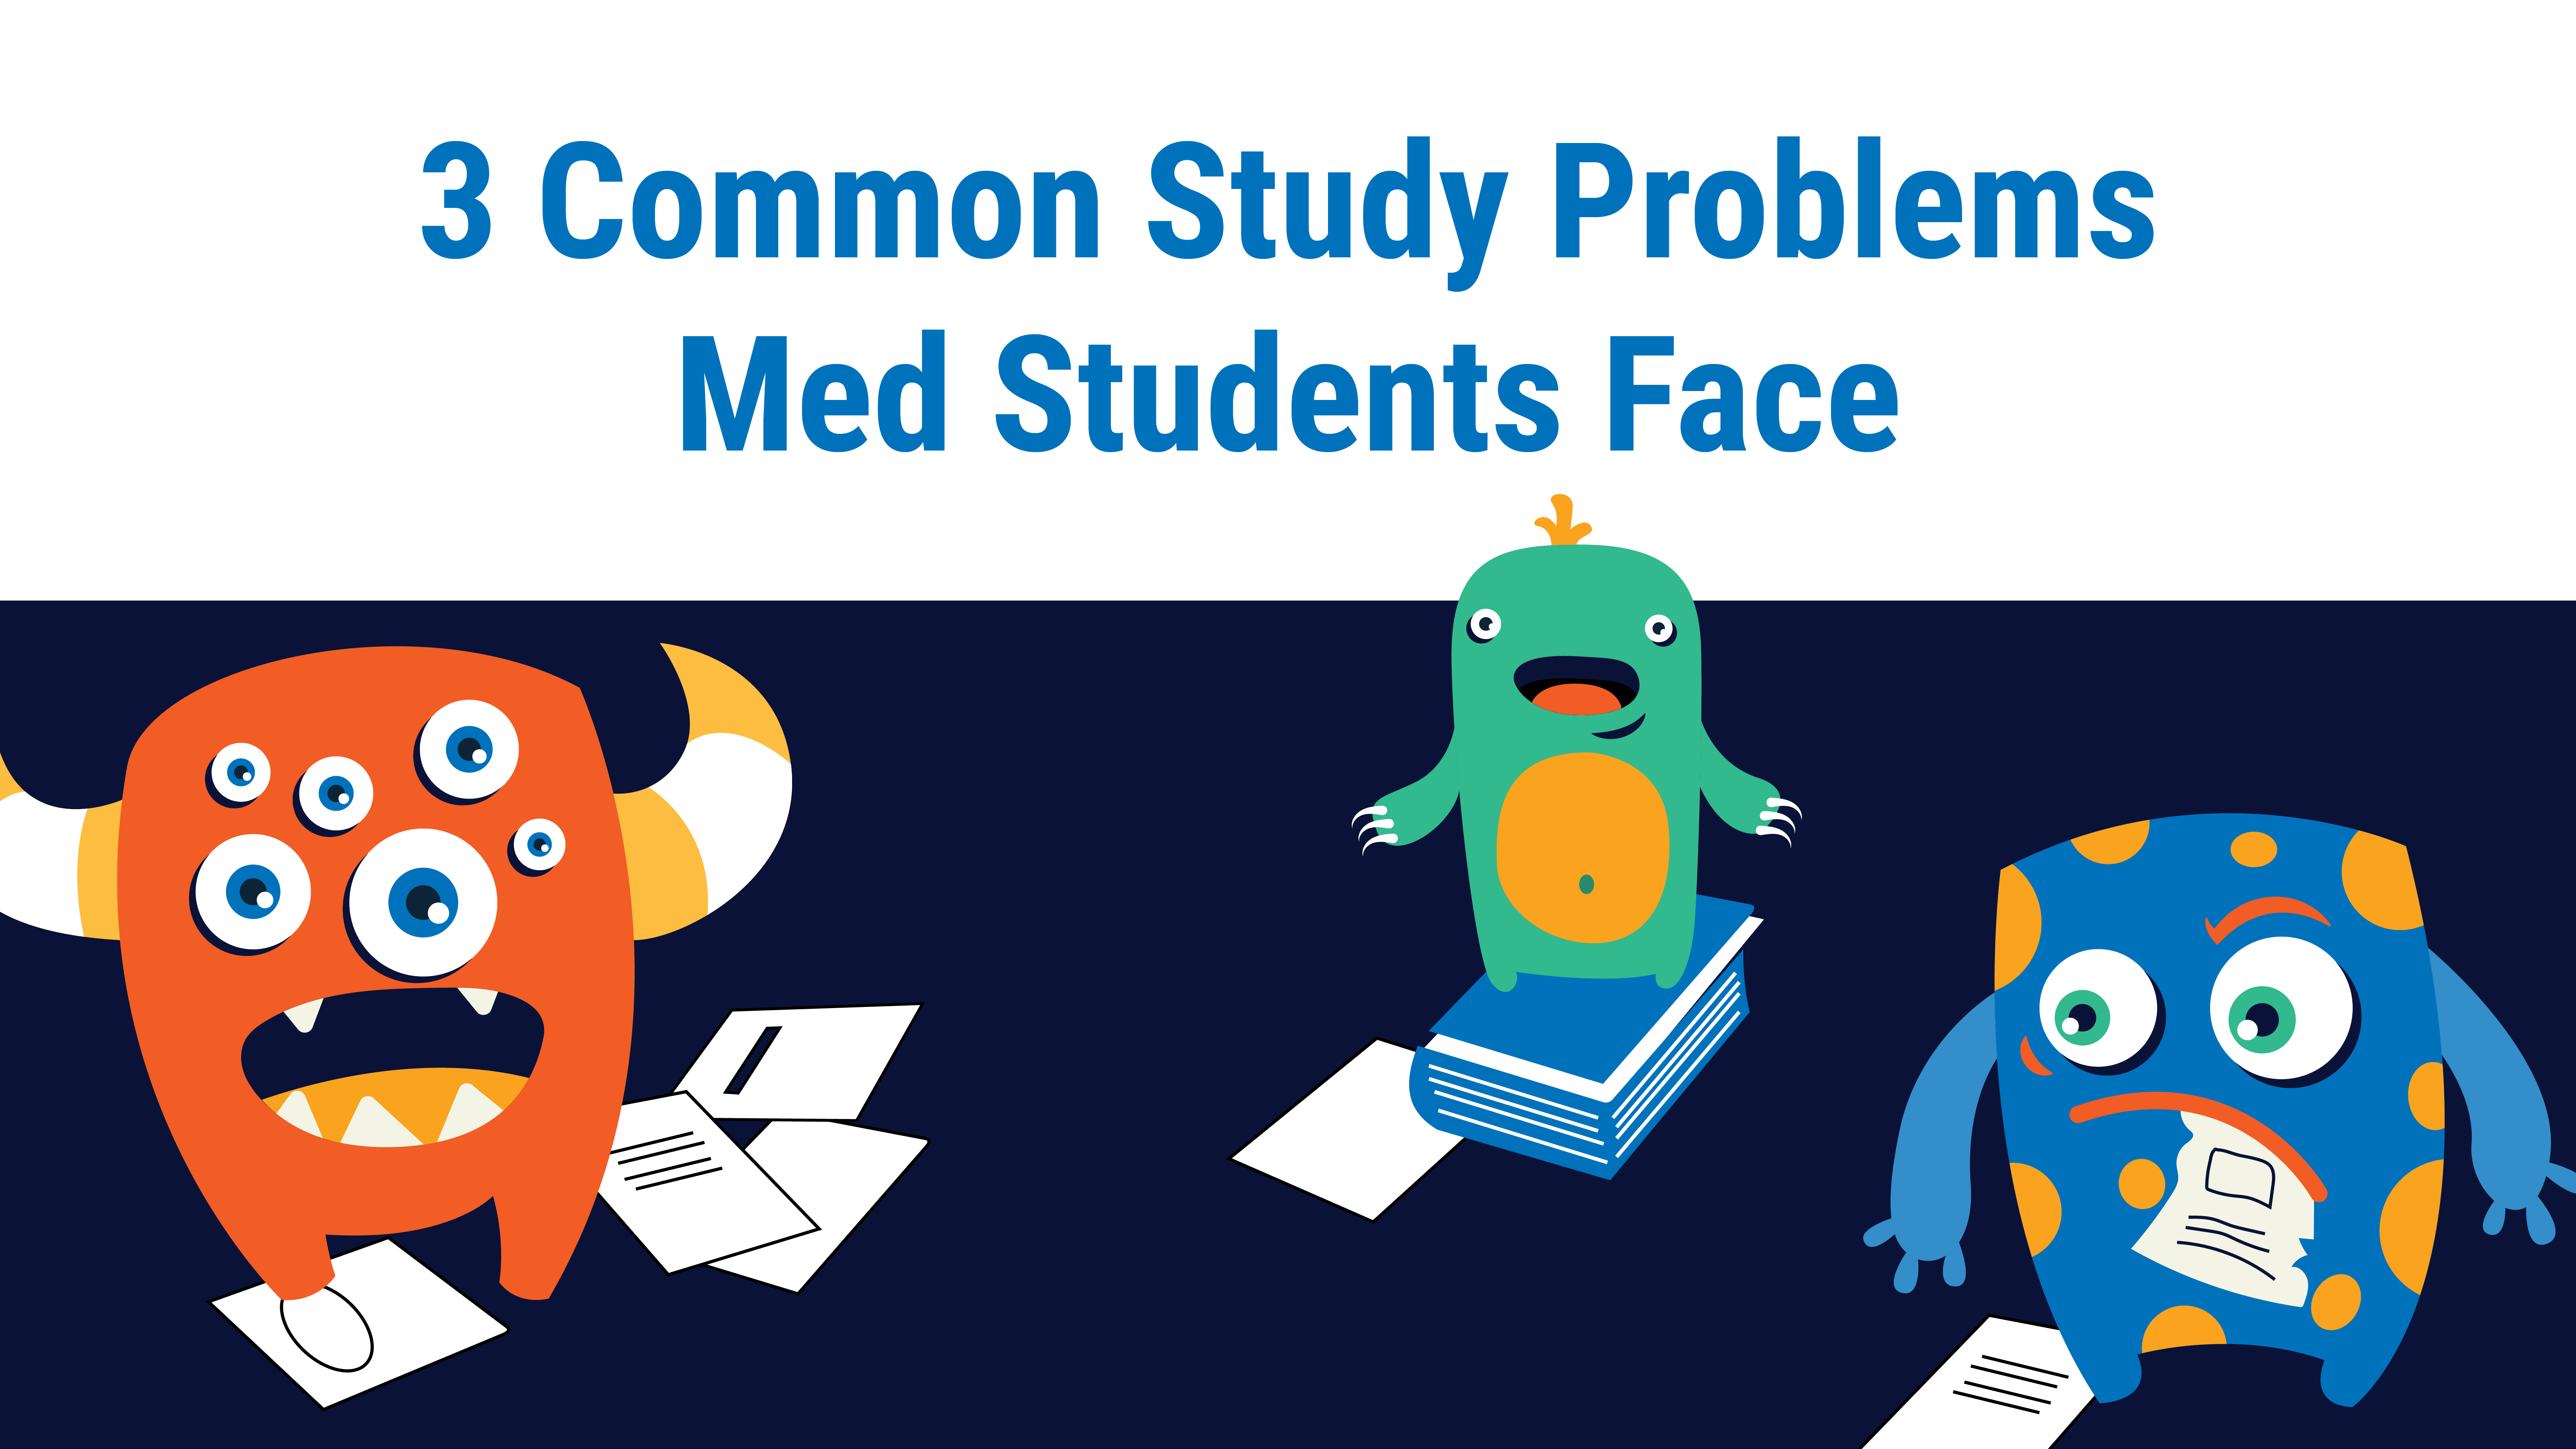 Featured image for “3 Common Study Problems Med Students Face”